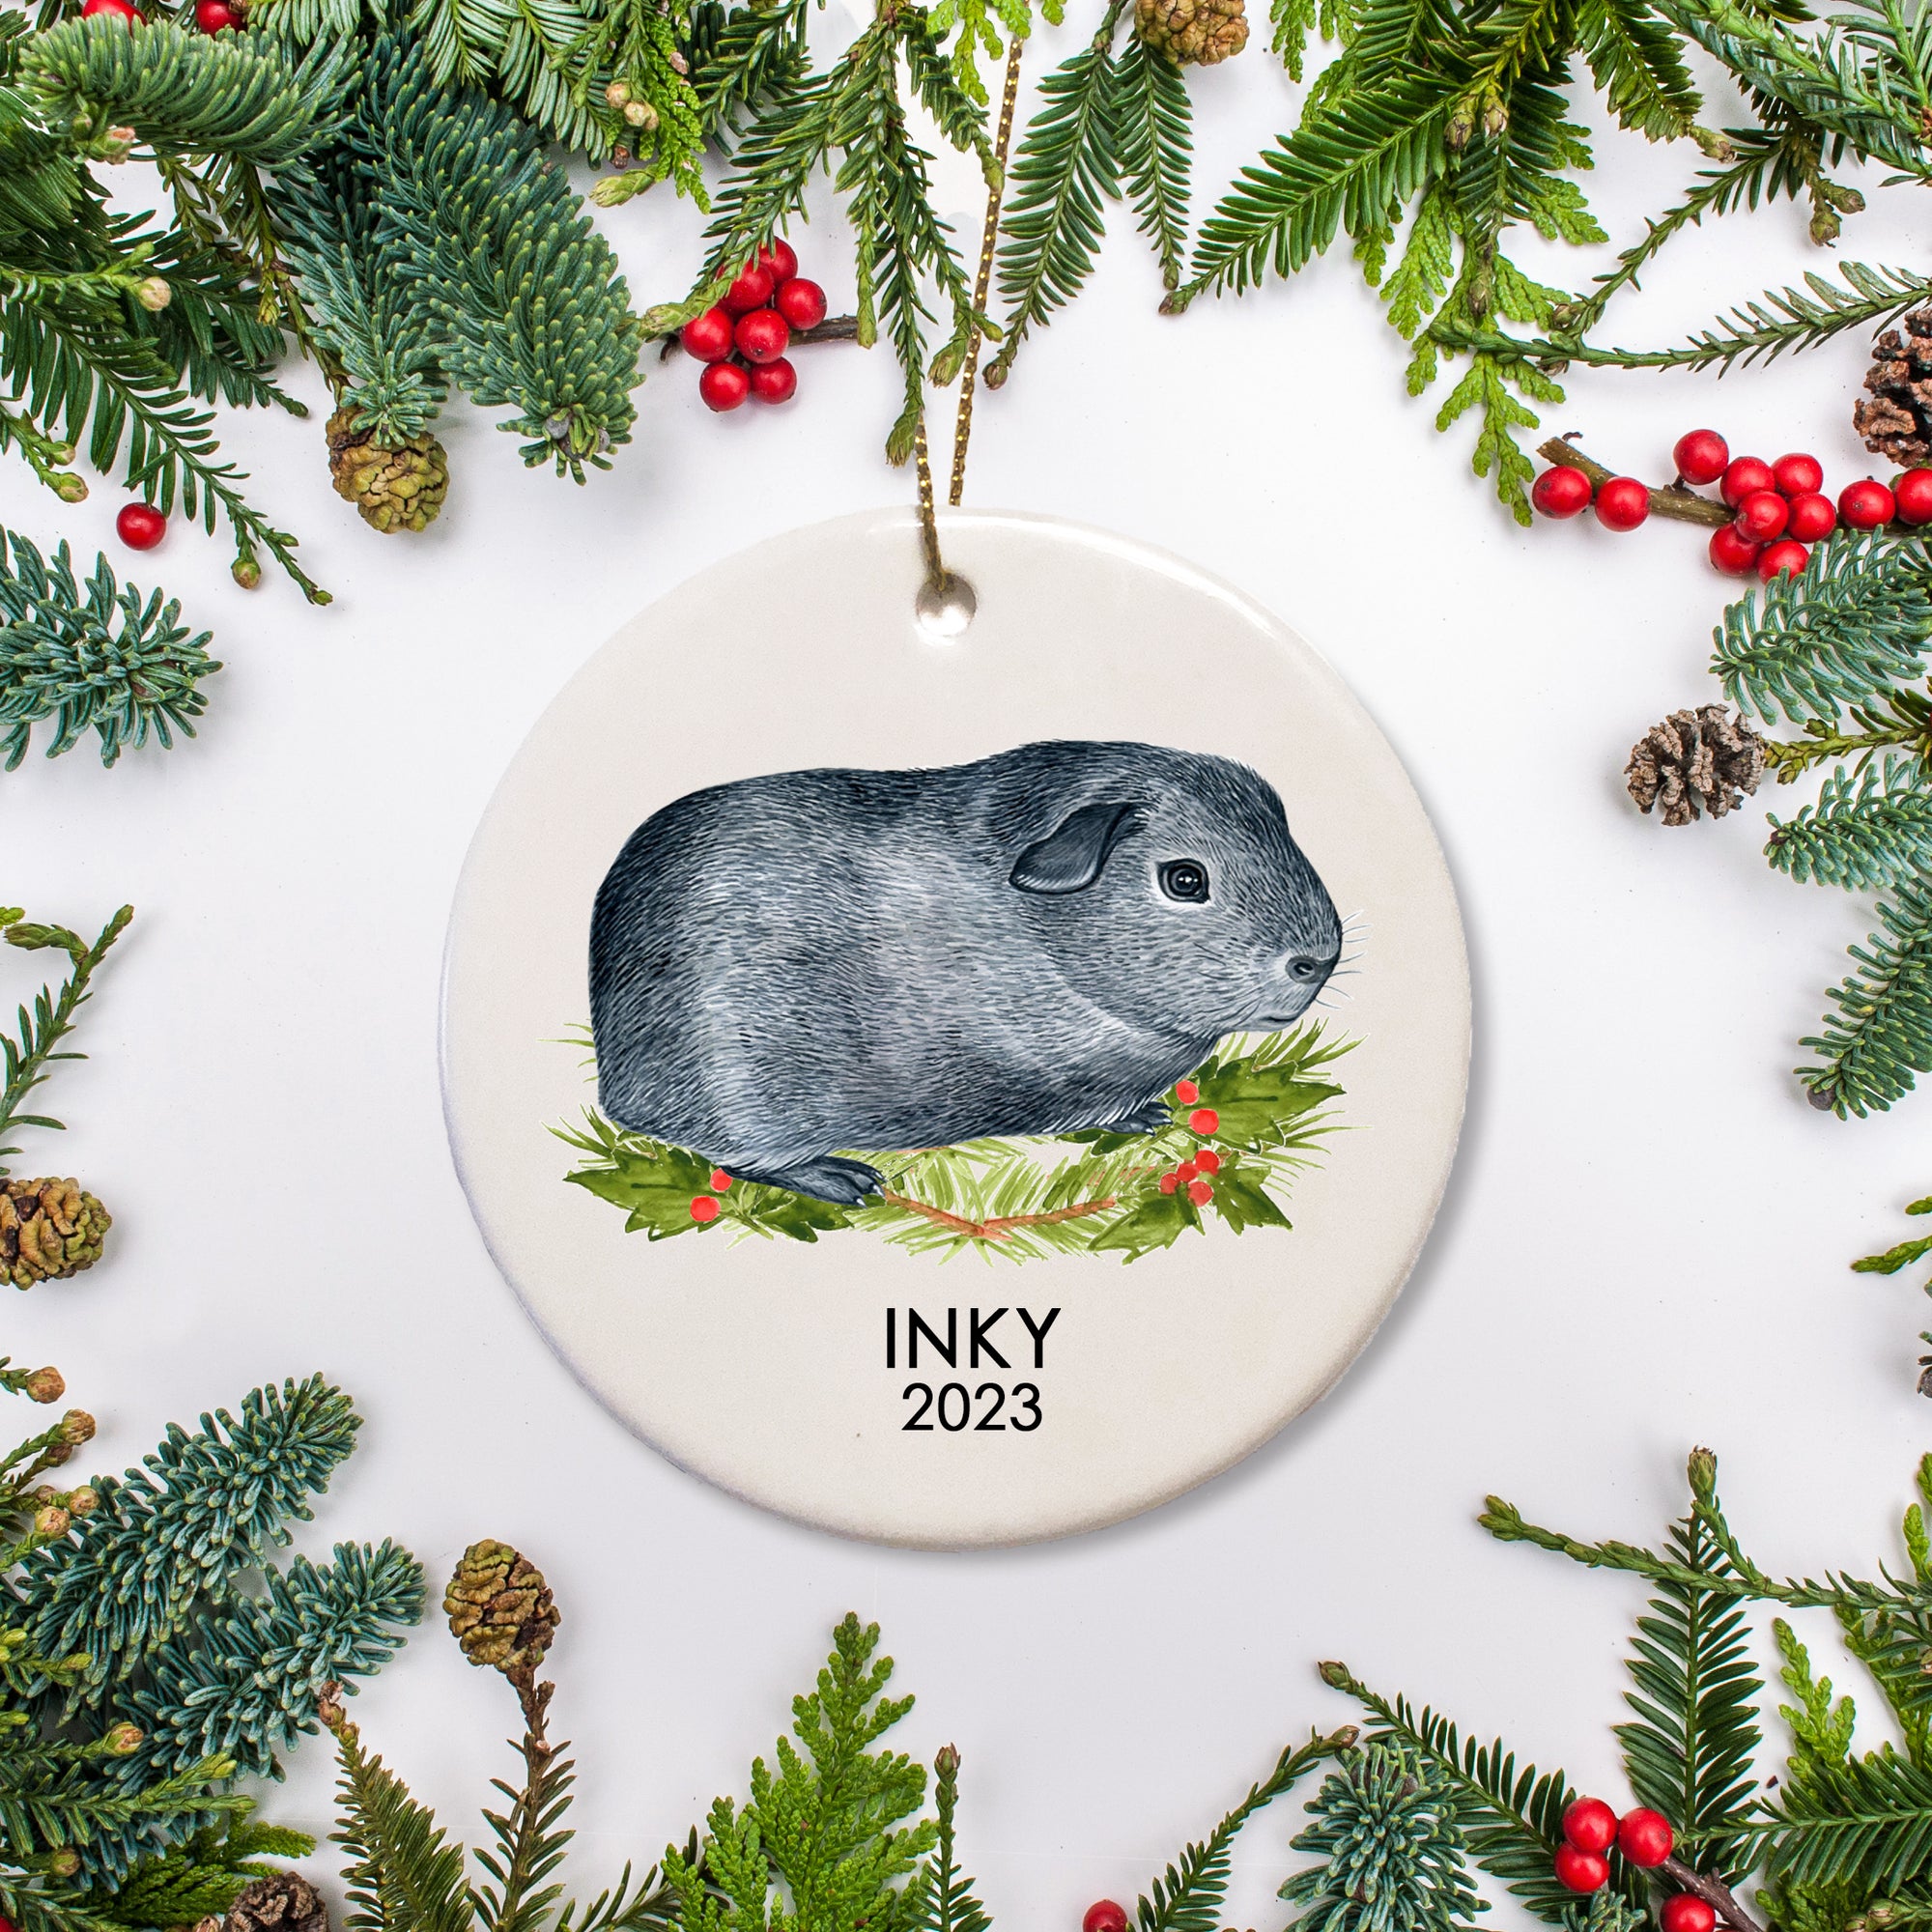 A special ornament for a special guinea pig. This is ceramic and includes a name and date for a  Agouti guinea pig